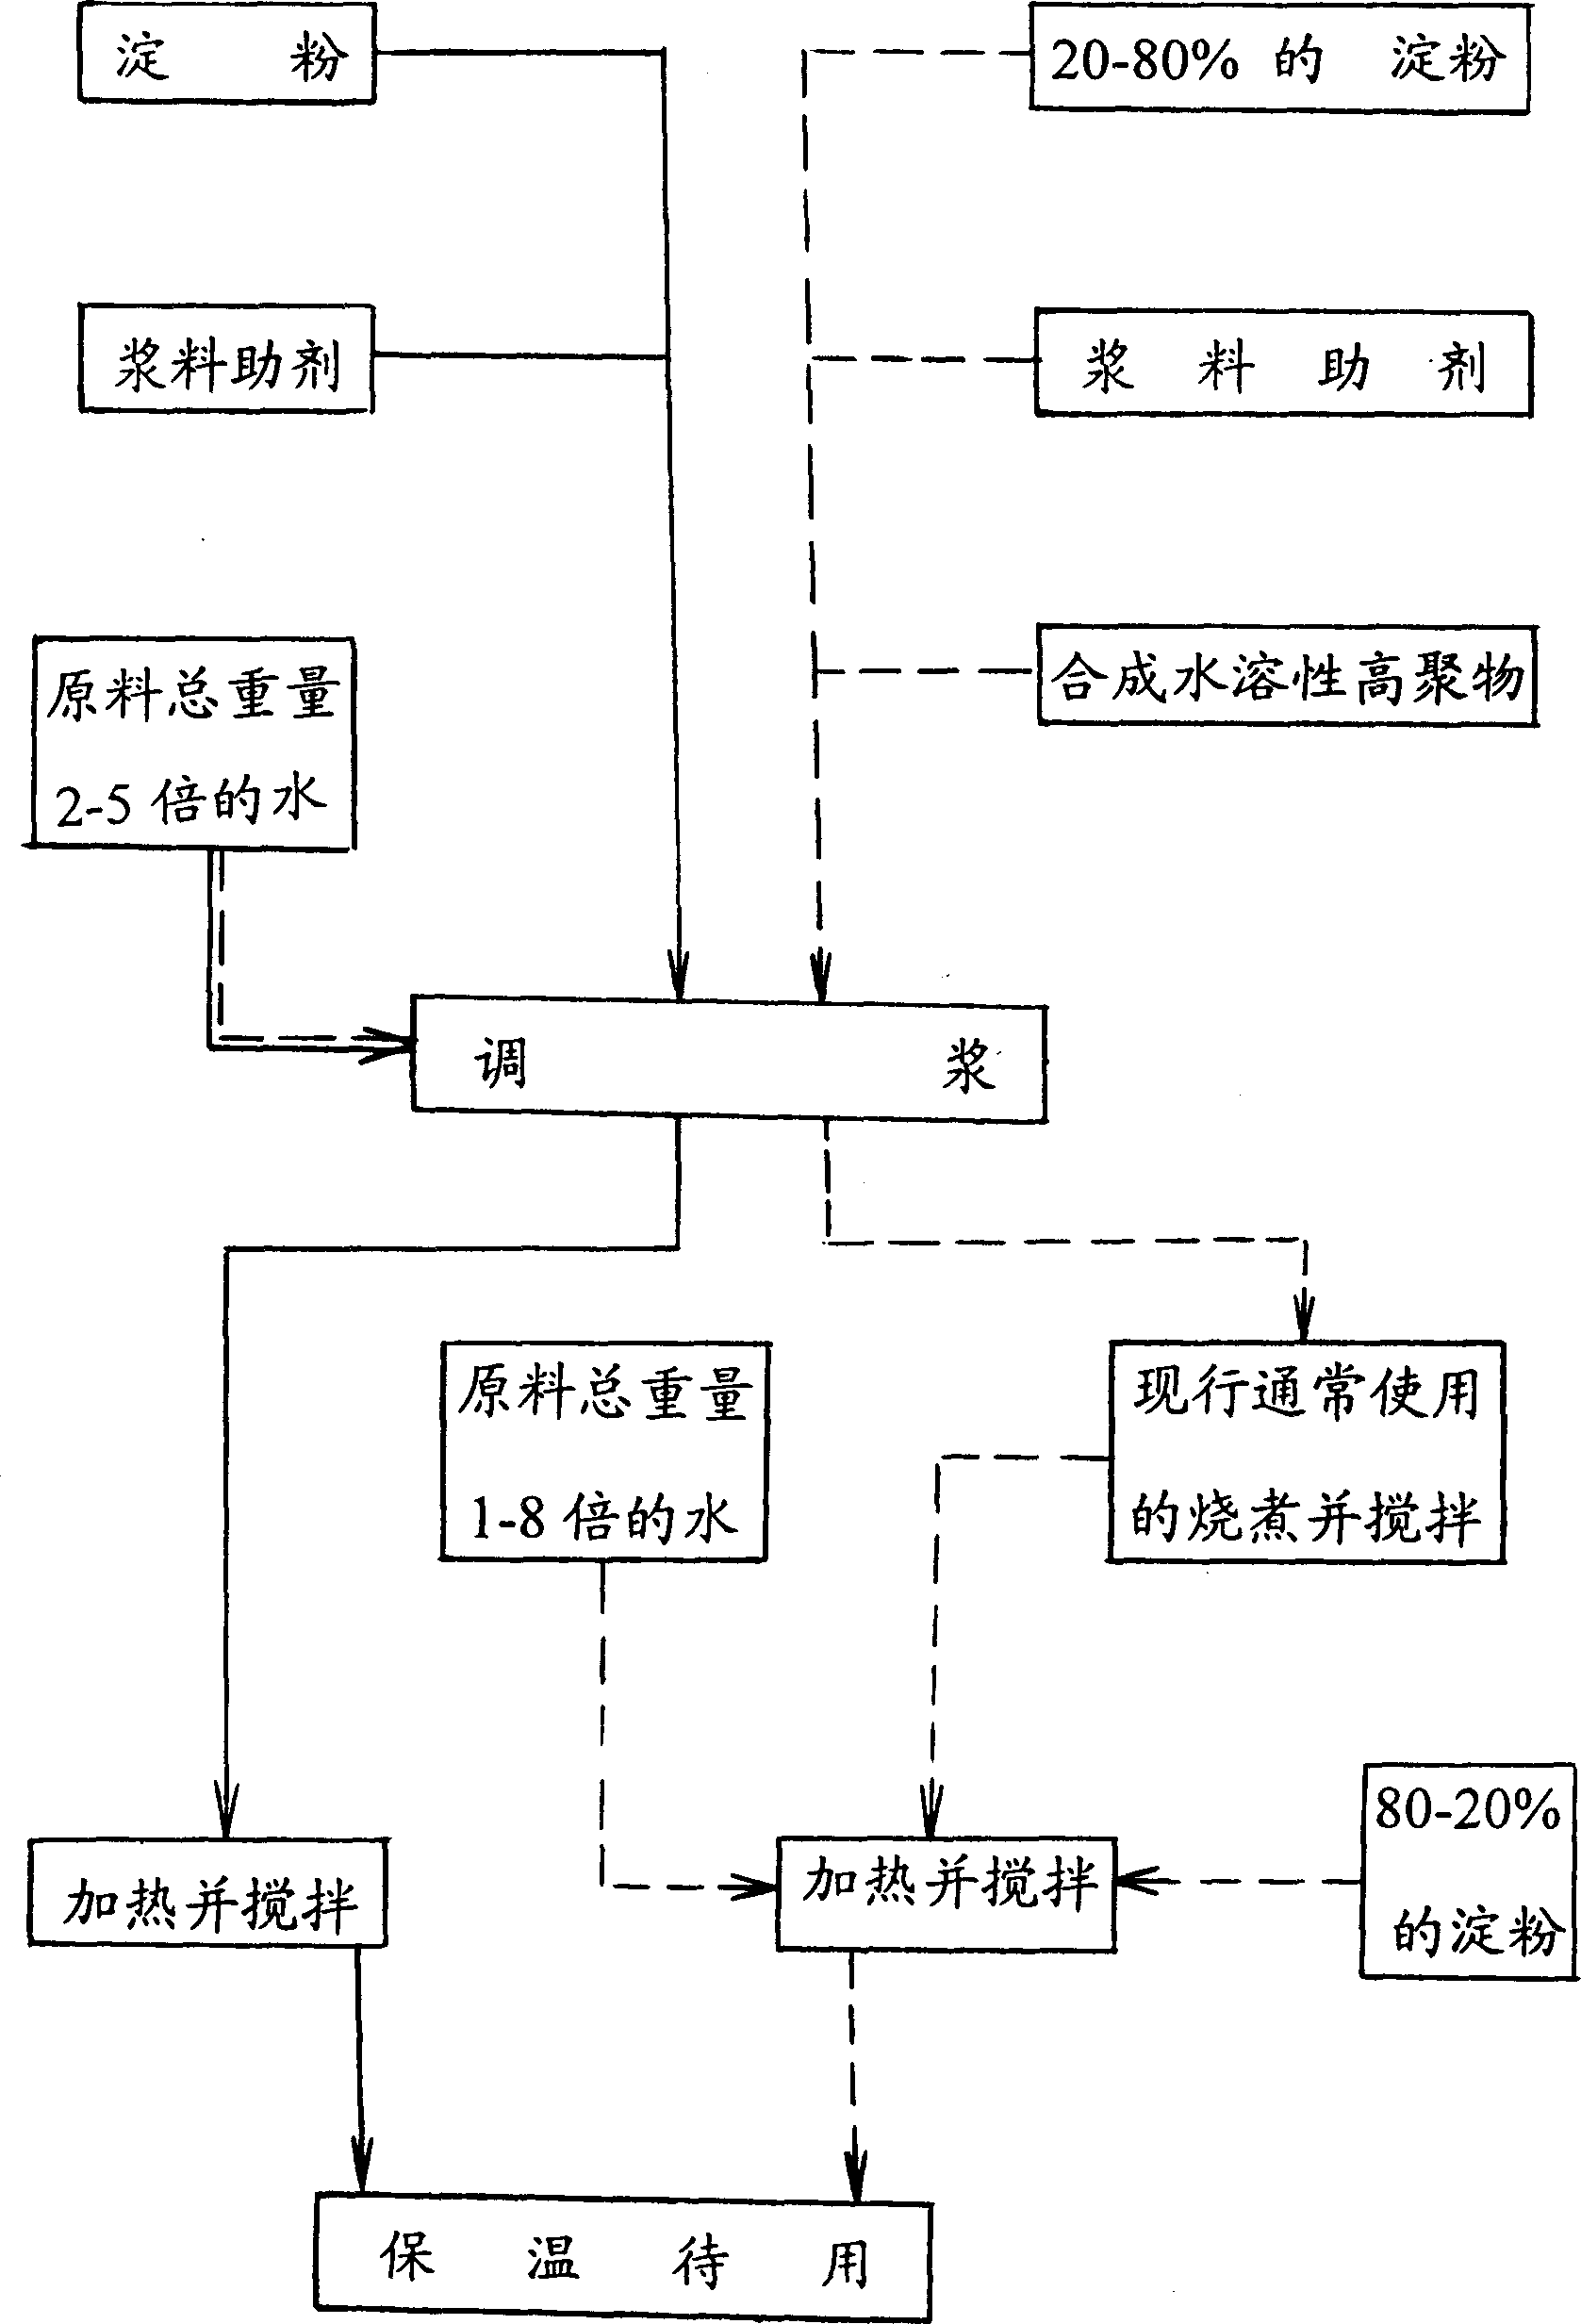 Yarn size producing method for textile warp